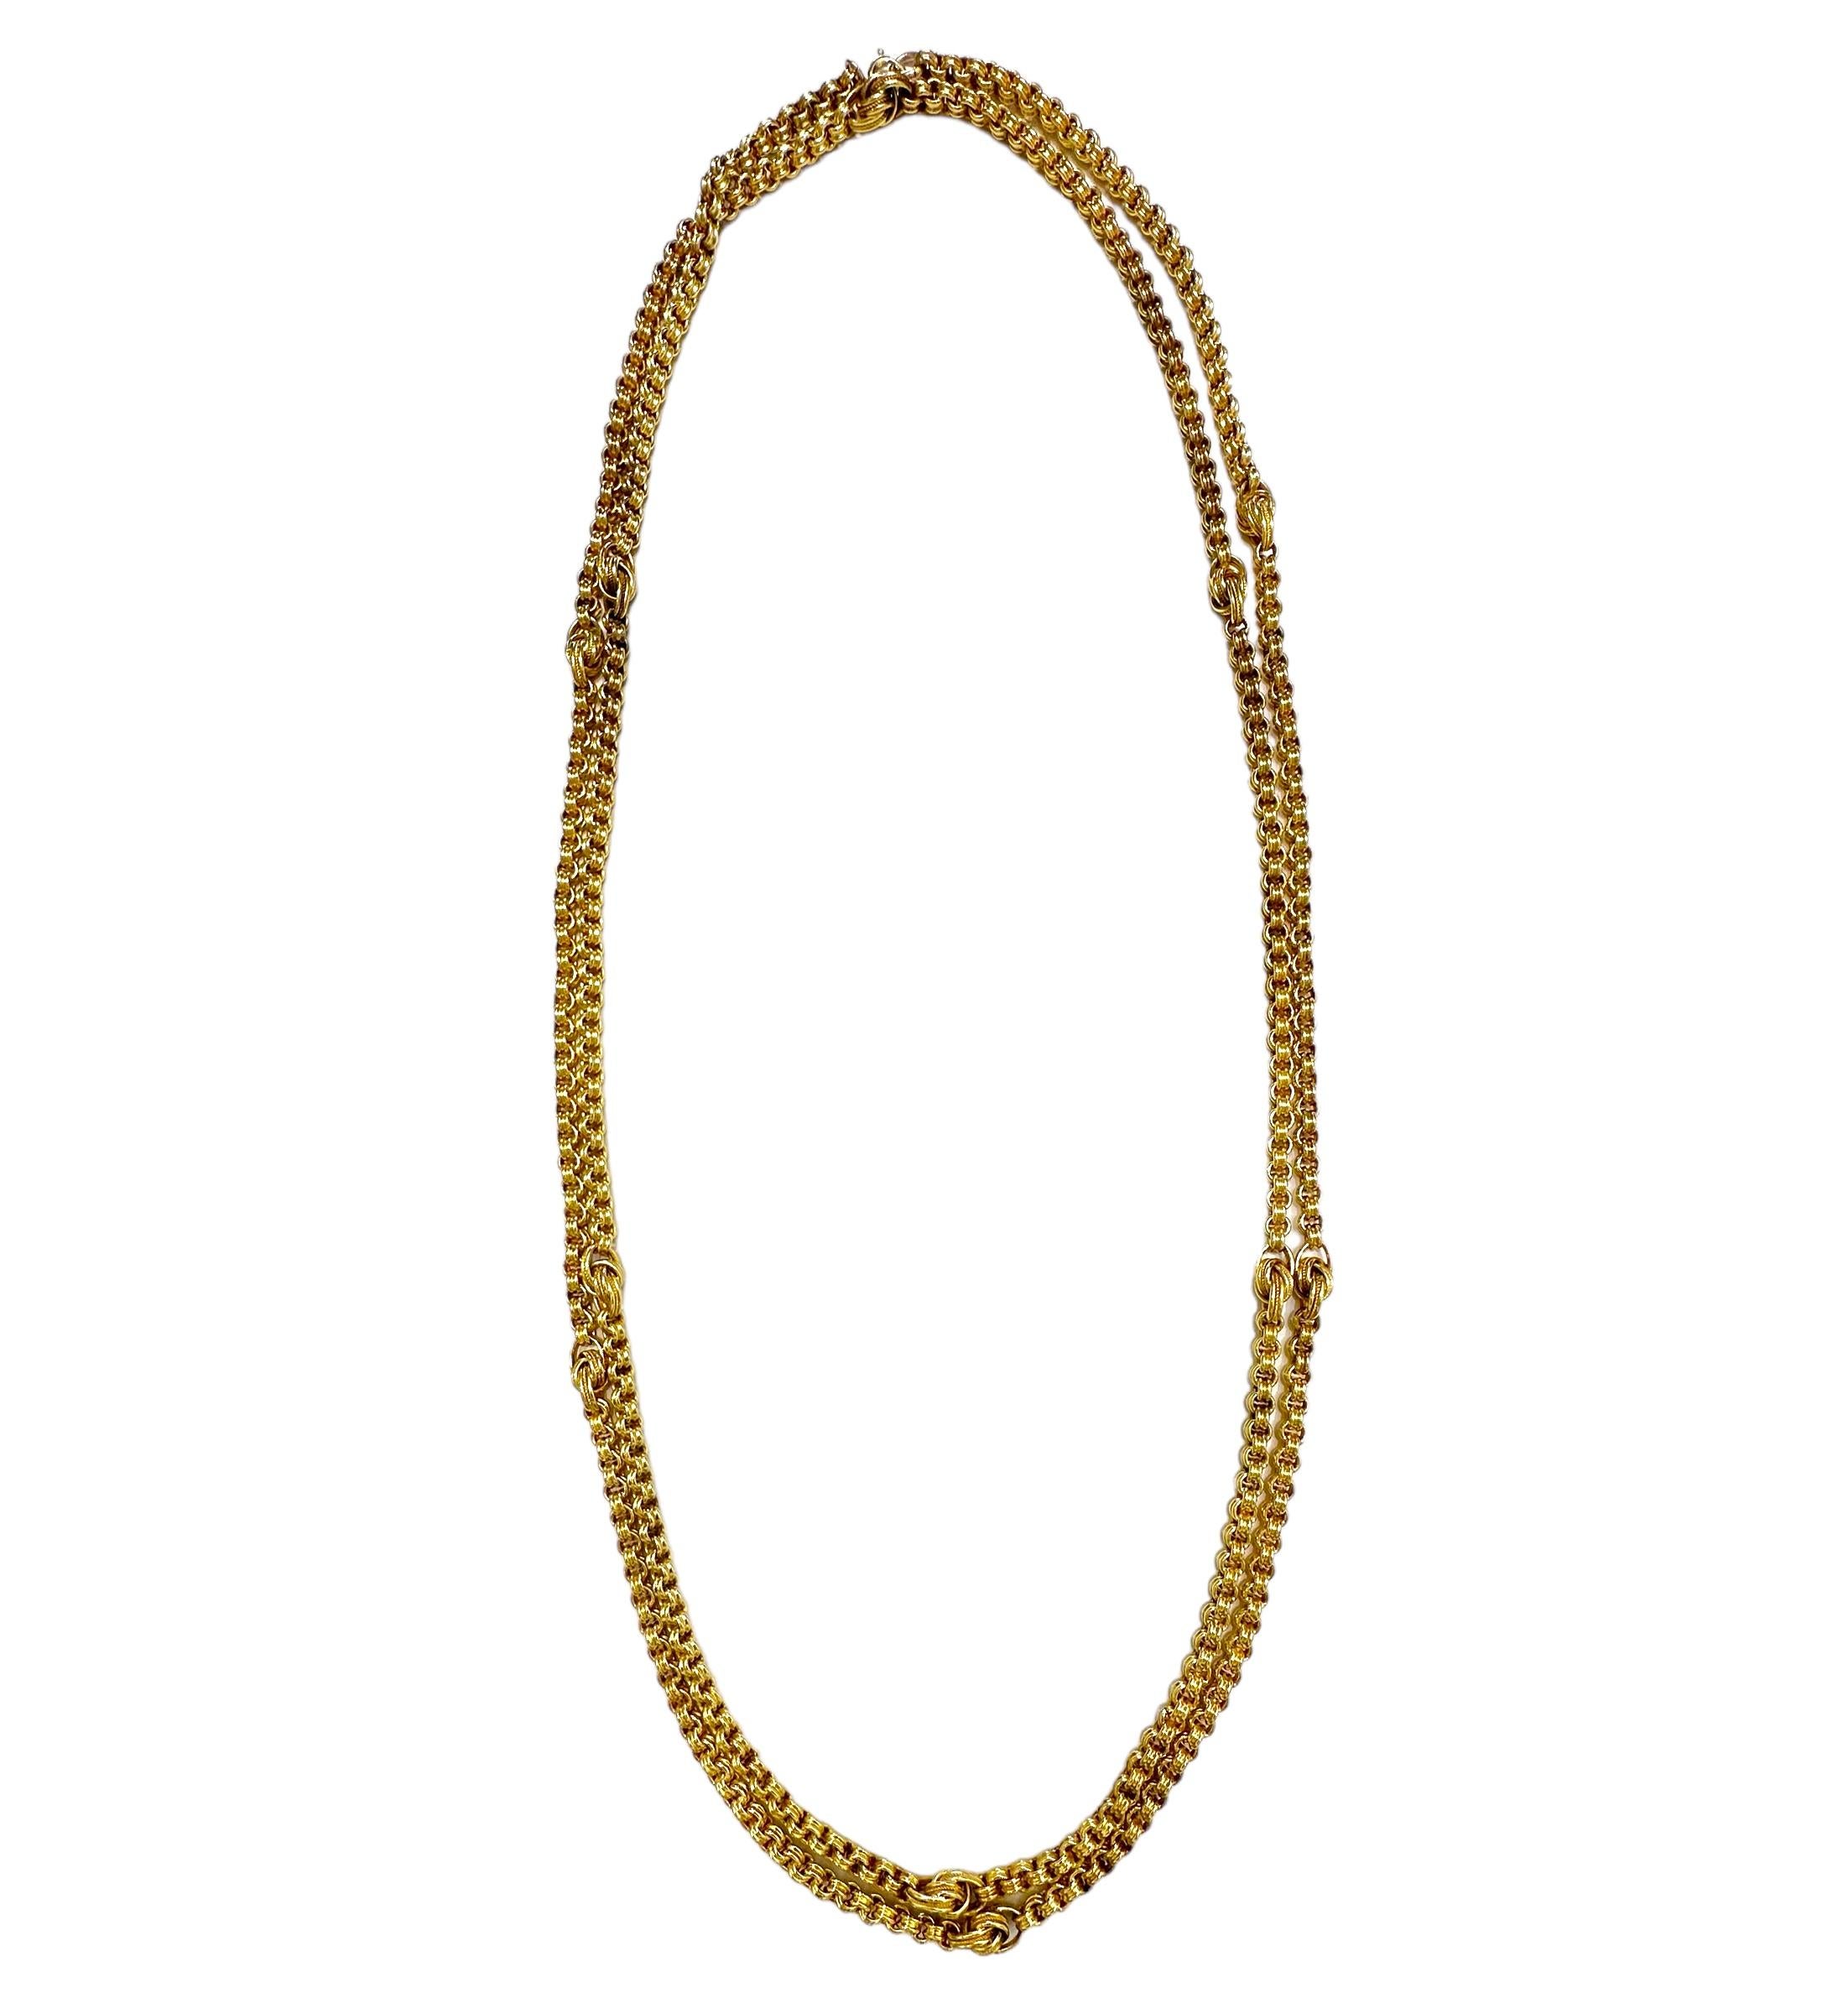 This interesting 55 inch long 15k yellow gold Victorian period British necklace is comprised of a single line of double spiral links punctuated by knot motif links at 4 1/4 inch intervals. The knot links are larger double spiral links edged with